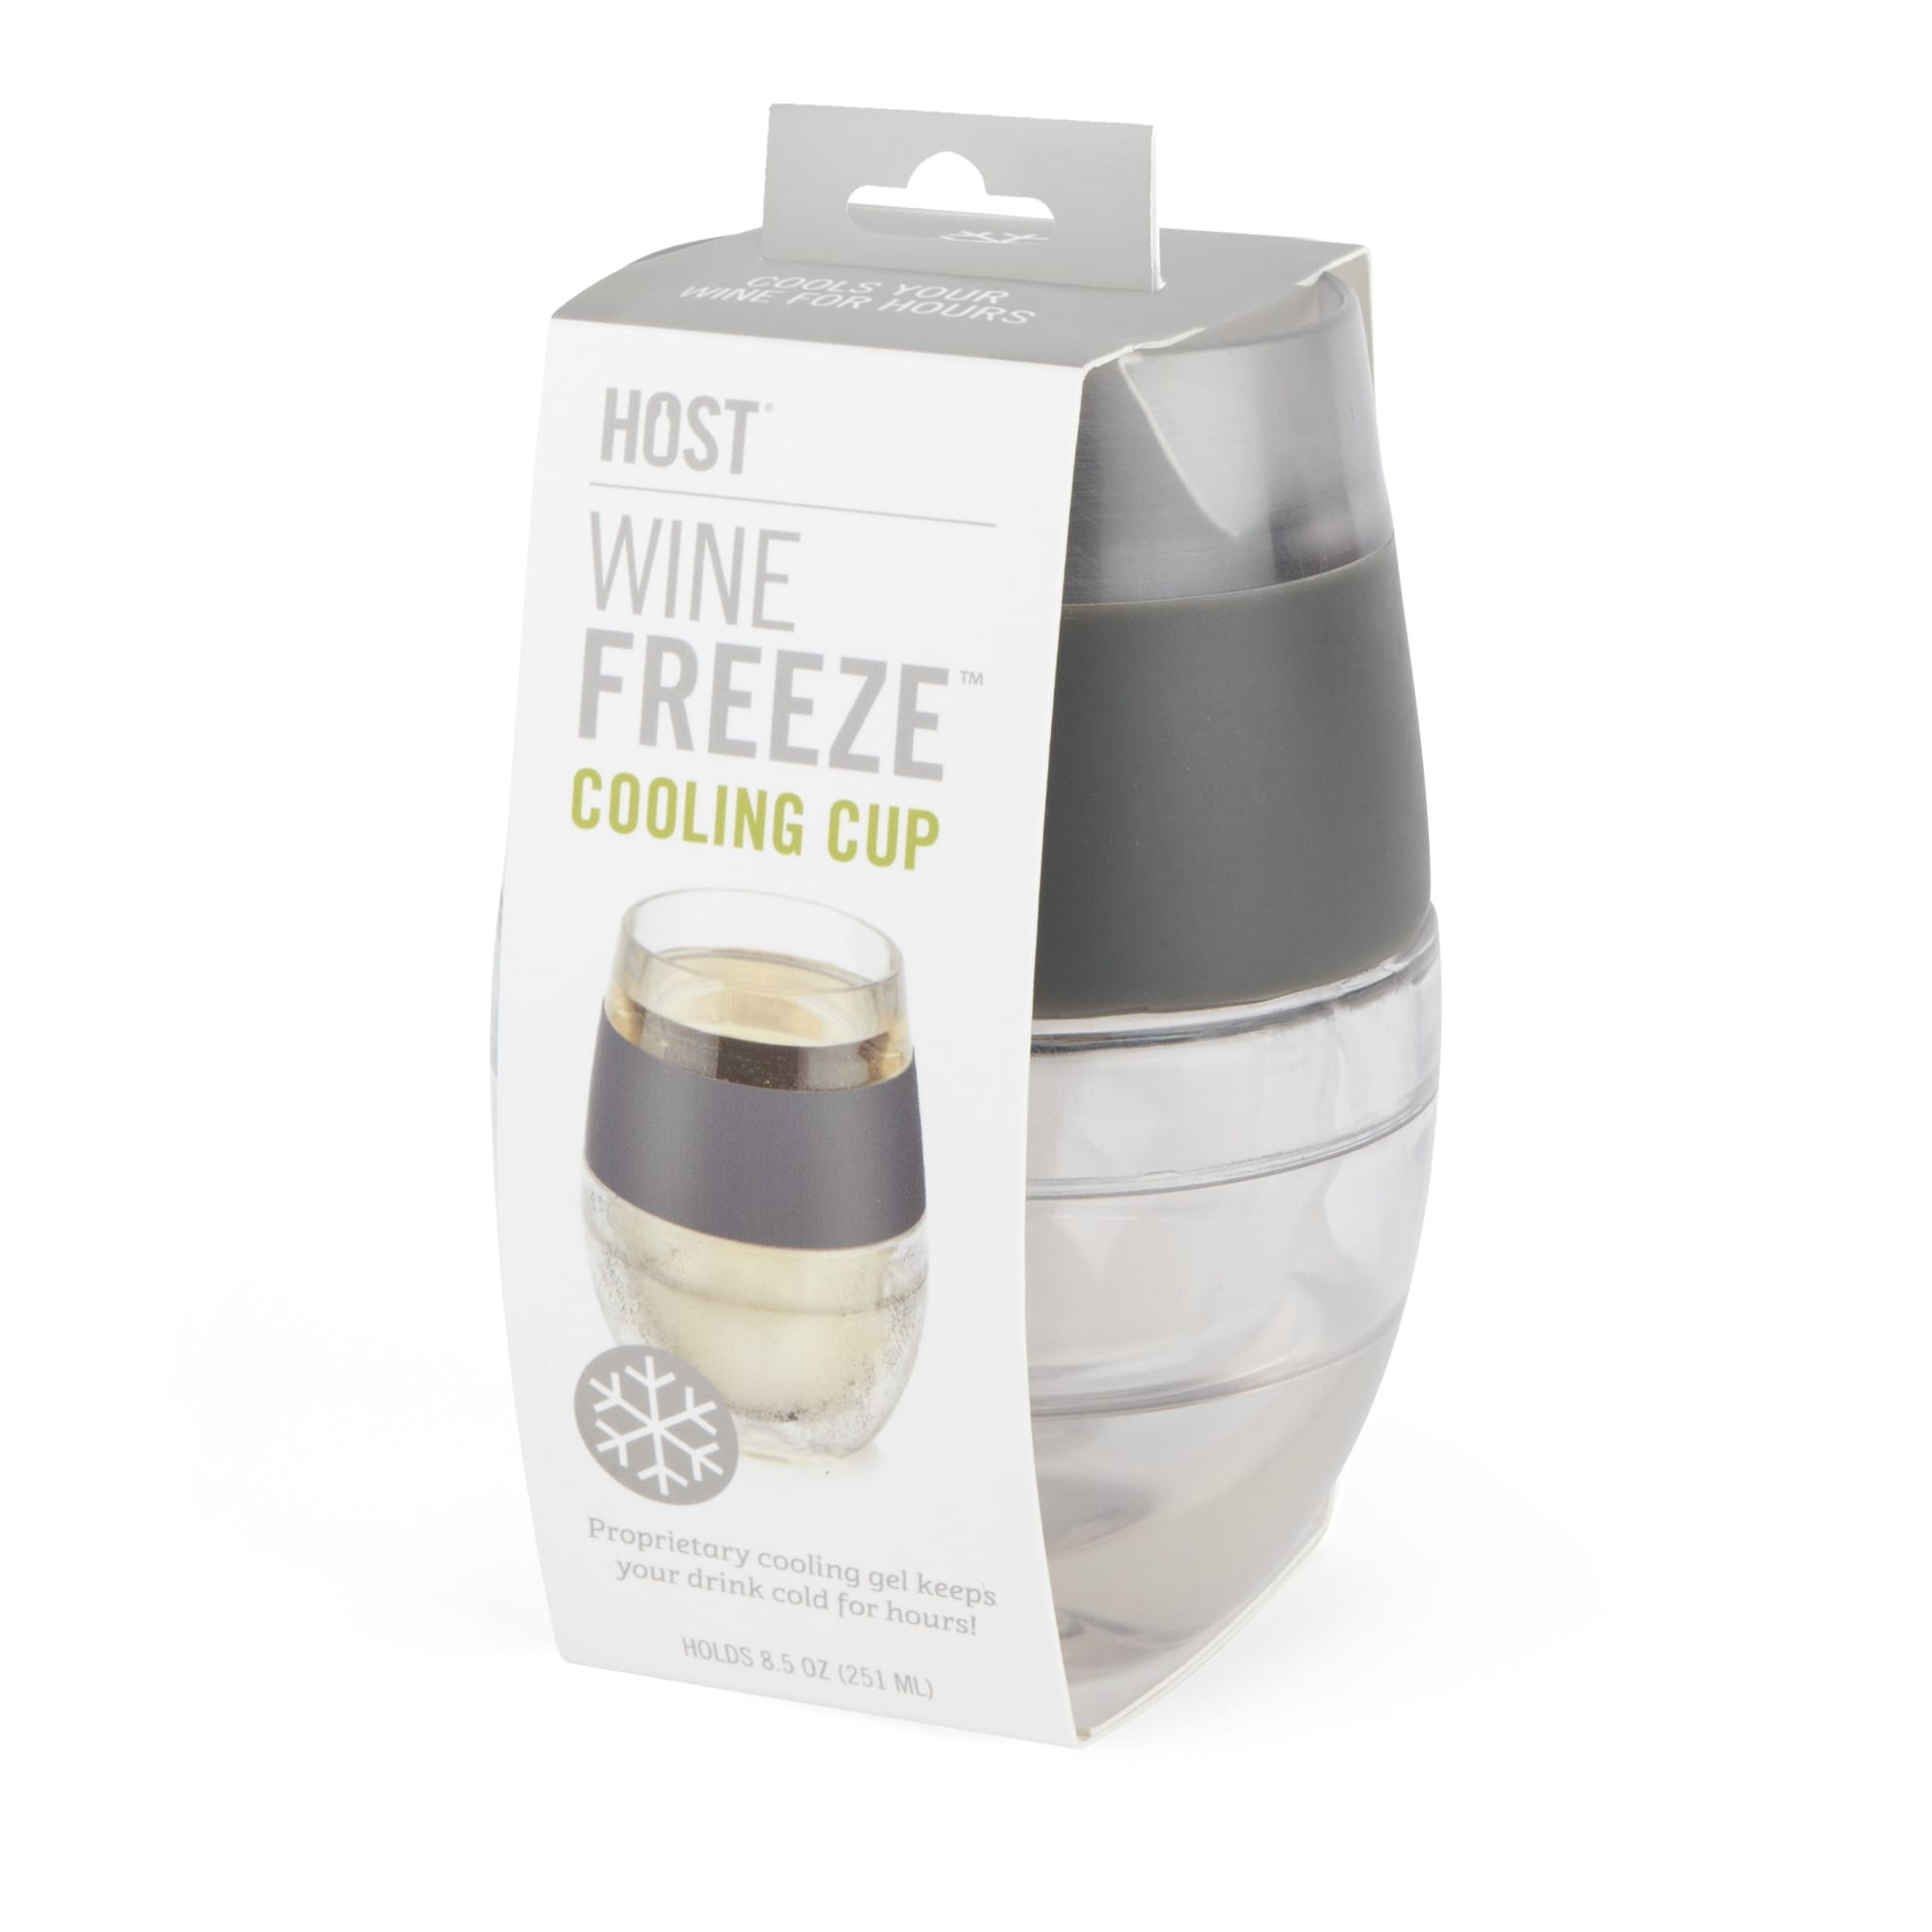 https://ak1.ostkcdn.com/images/products/is/images/direct/898867d48dc56c90b99b91859b0b0ef4a0a826da/Wine-FREEZE-Cooling-Cup-in-Grey-%281-pack%29-by-HOST.jpg